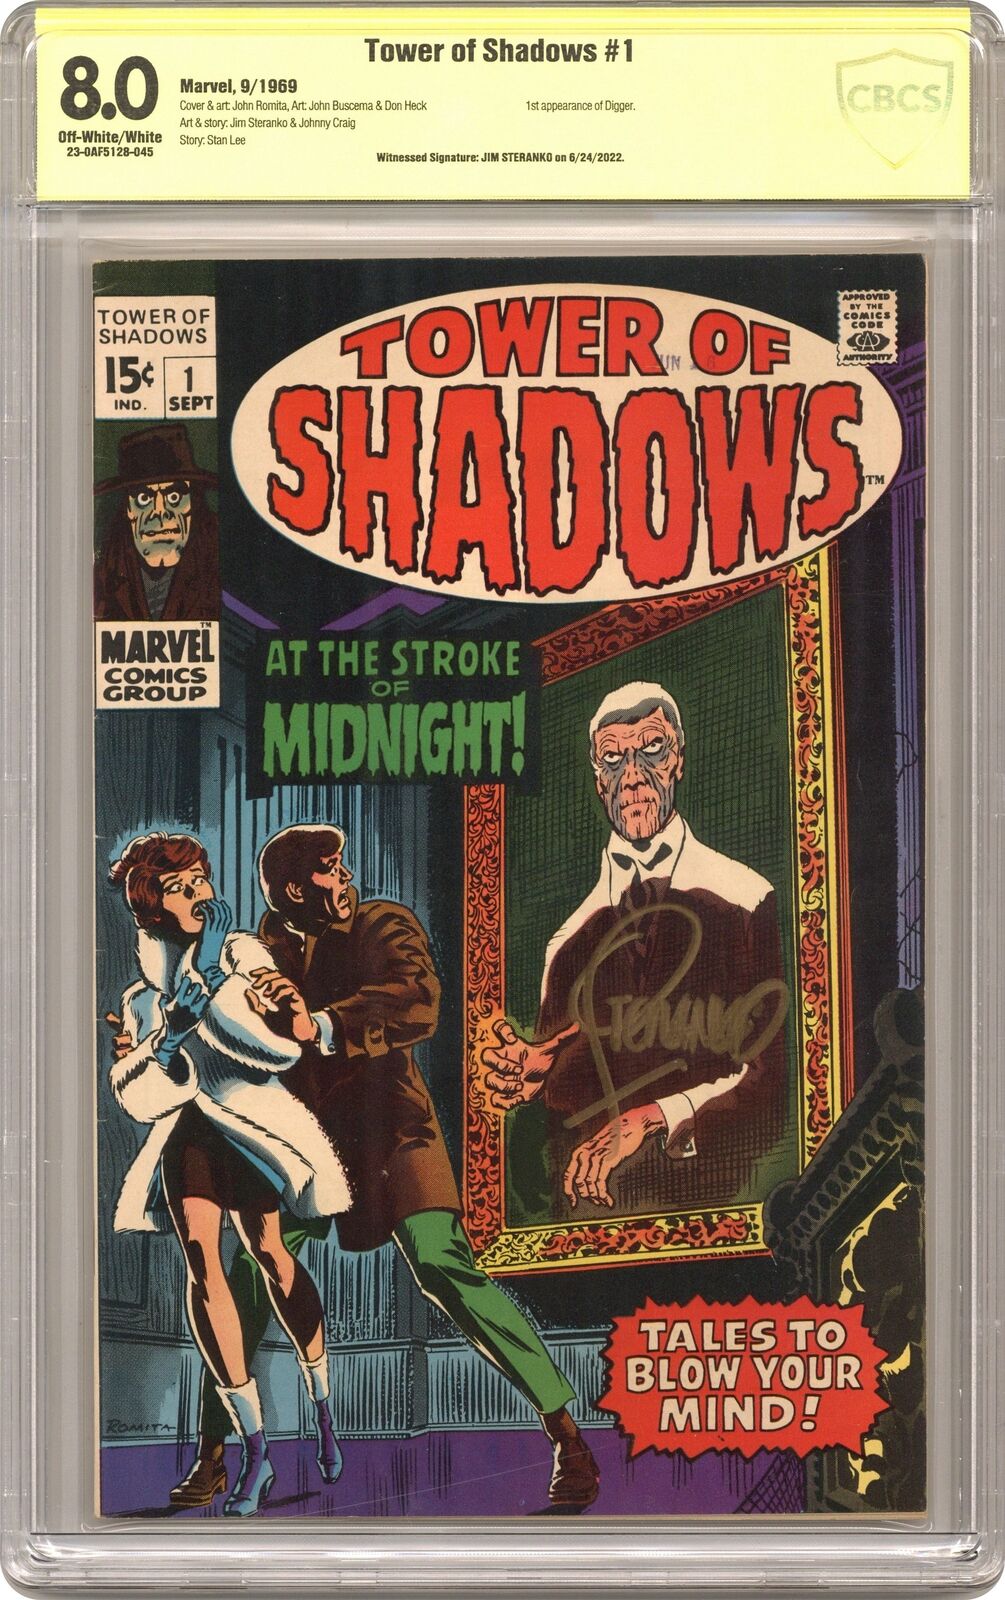 Tower of Shadows #1 CBCS 8.0 SS Jim Steranko 1969 23-0AF5128-045